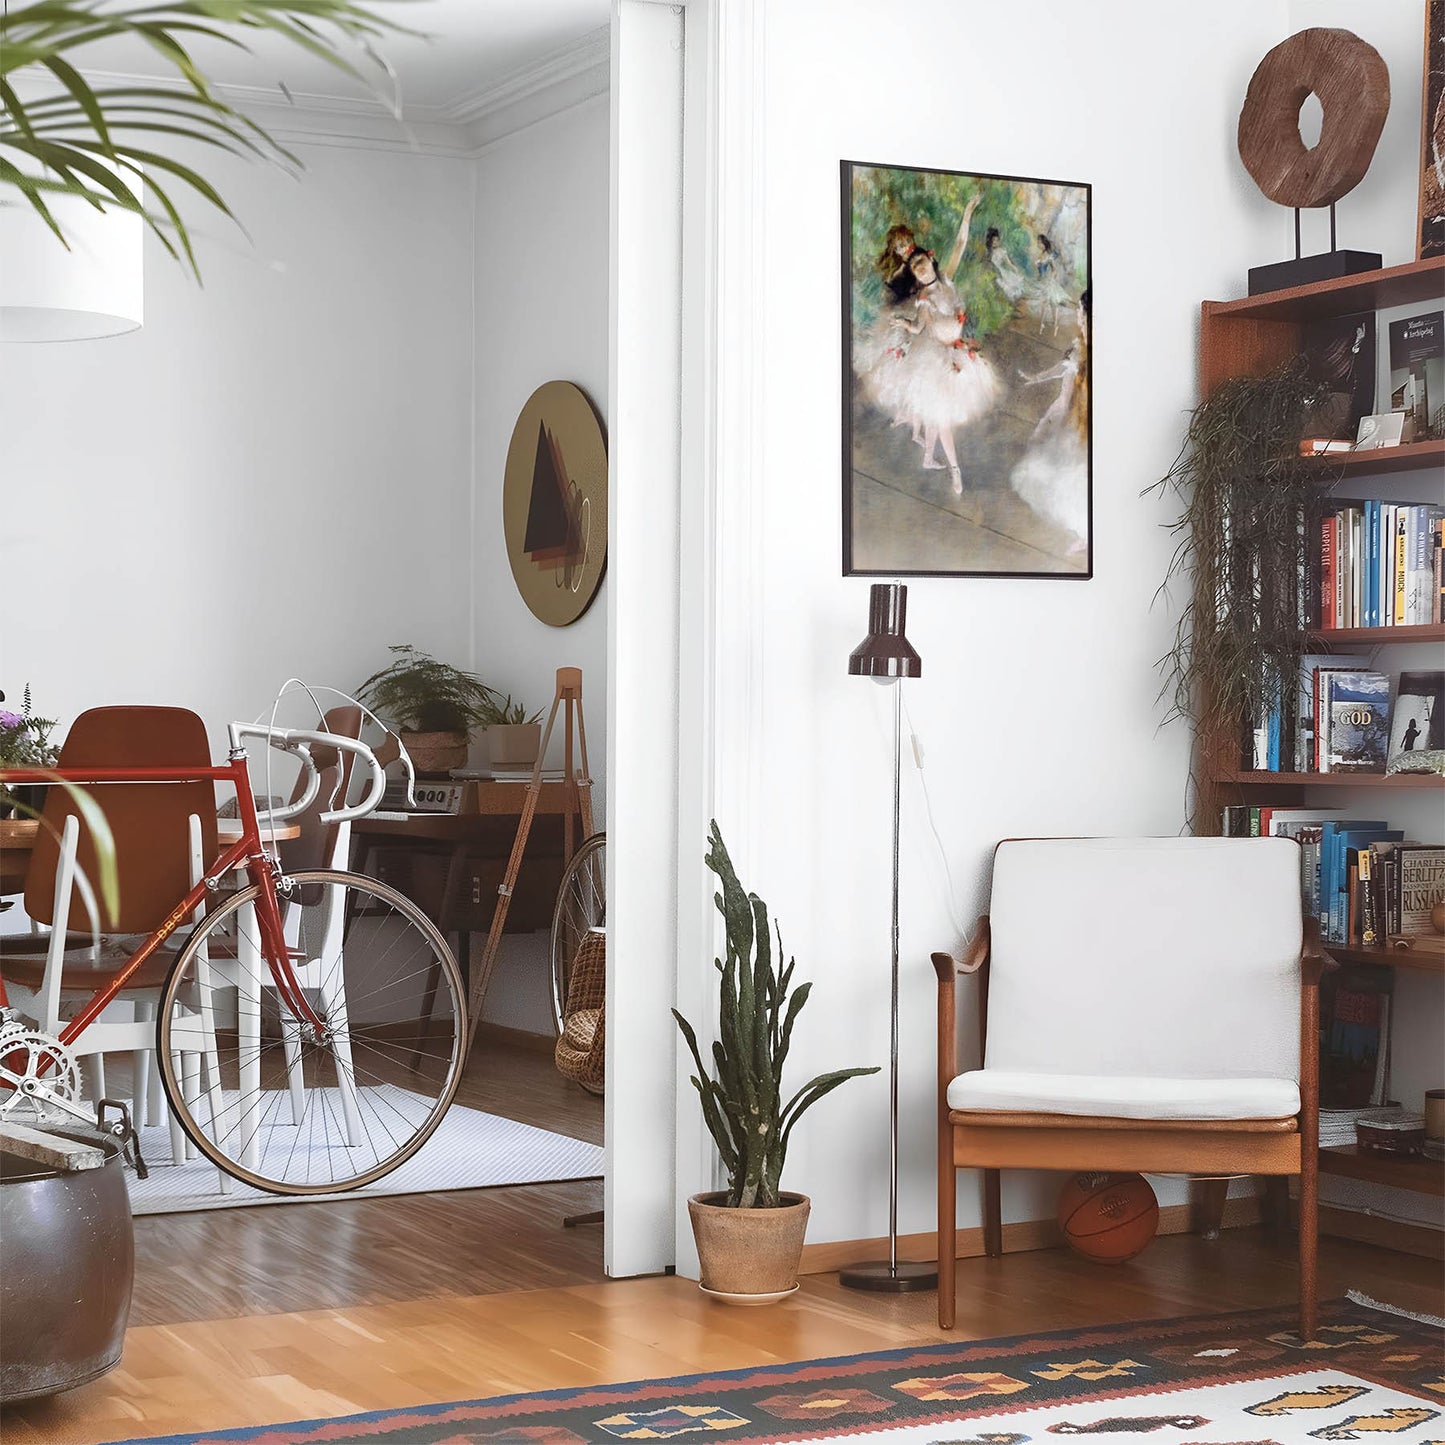 Eclectic living room with a road bike, bookshelf and house plants that features framed artwork of a White Dressed Ballerina above a chair and lamp